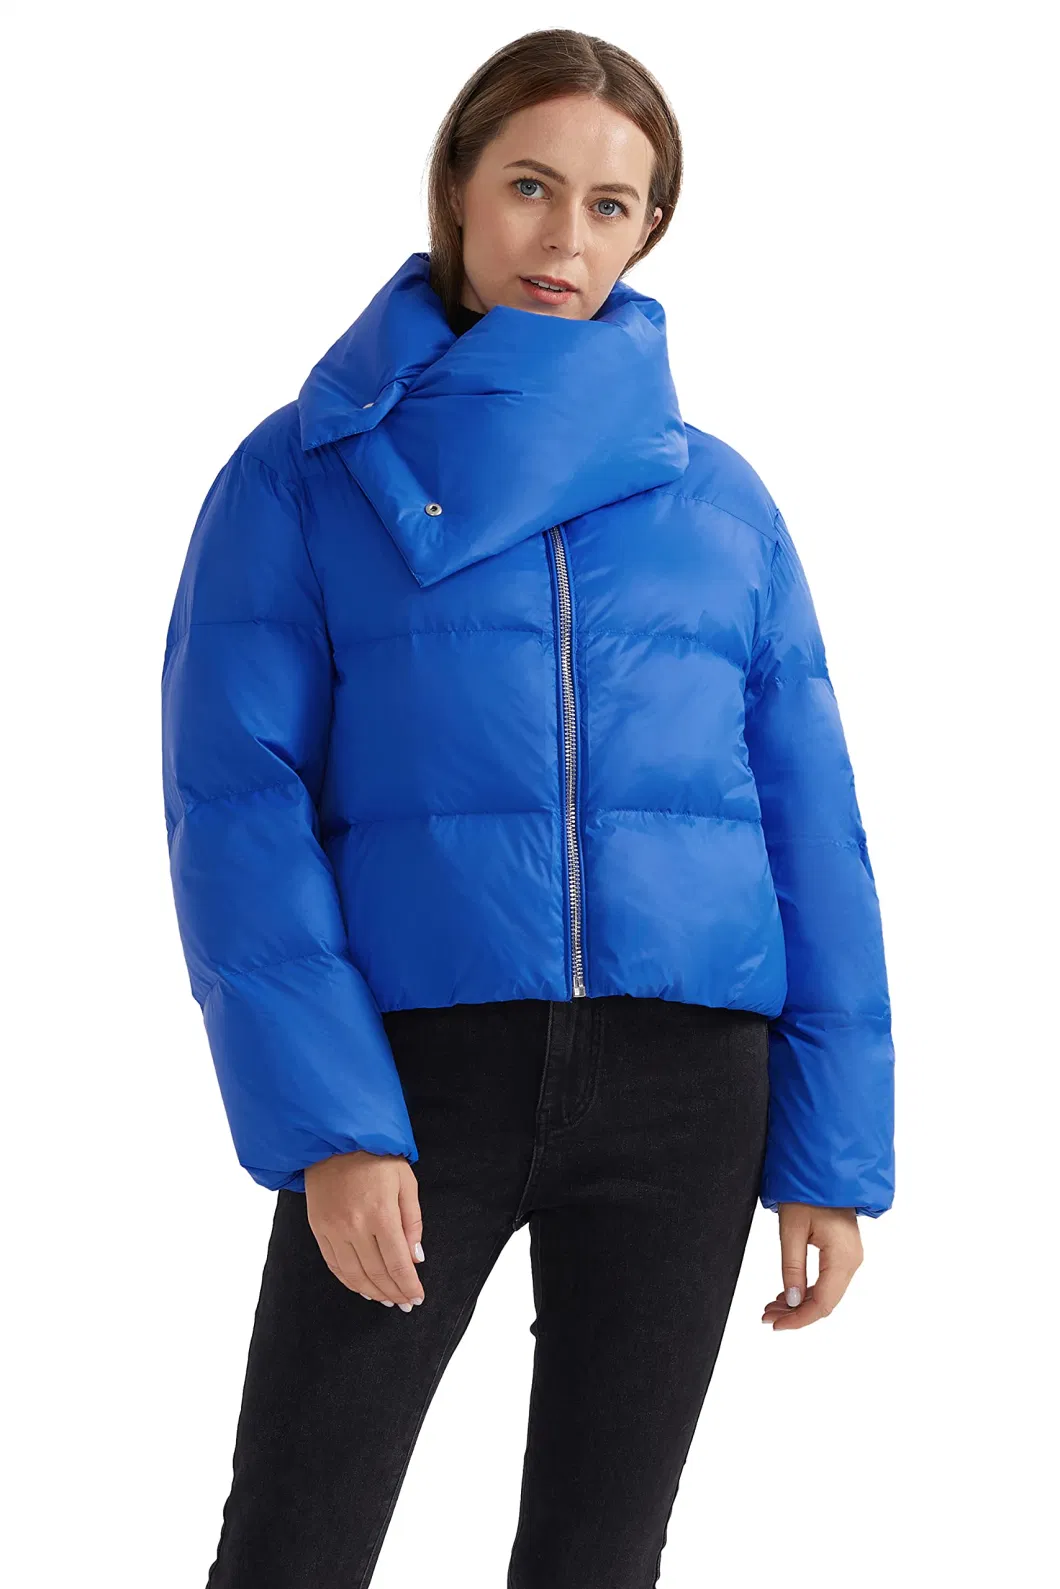 Asiapo China Factory Zara Style Women&prime;s Stylish Duck Down Jacket with Detachable Oversized Funnel Collar